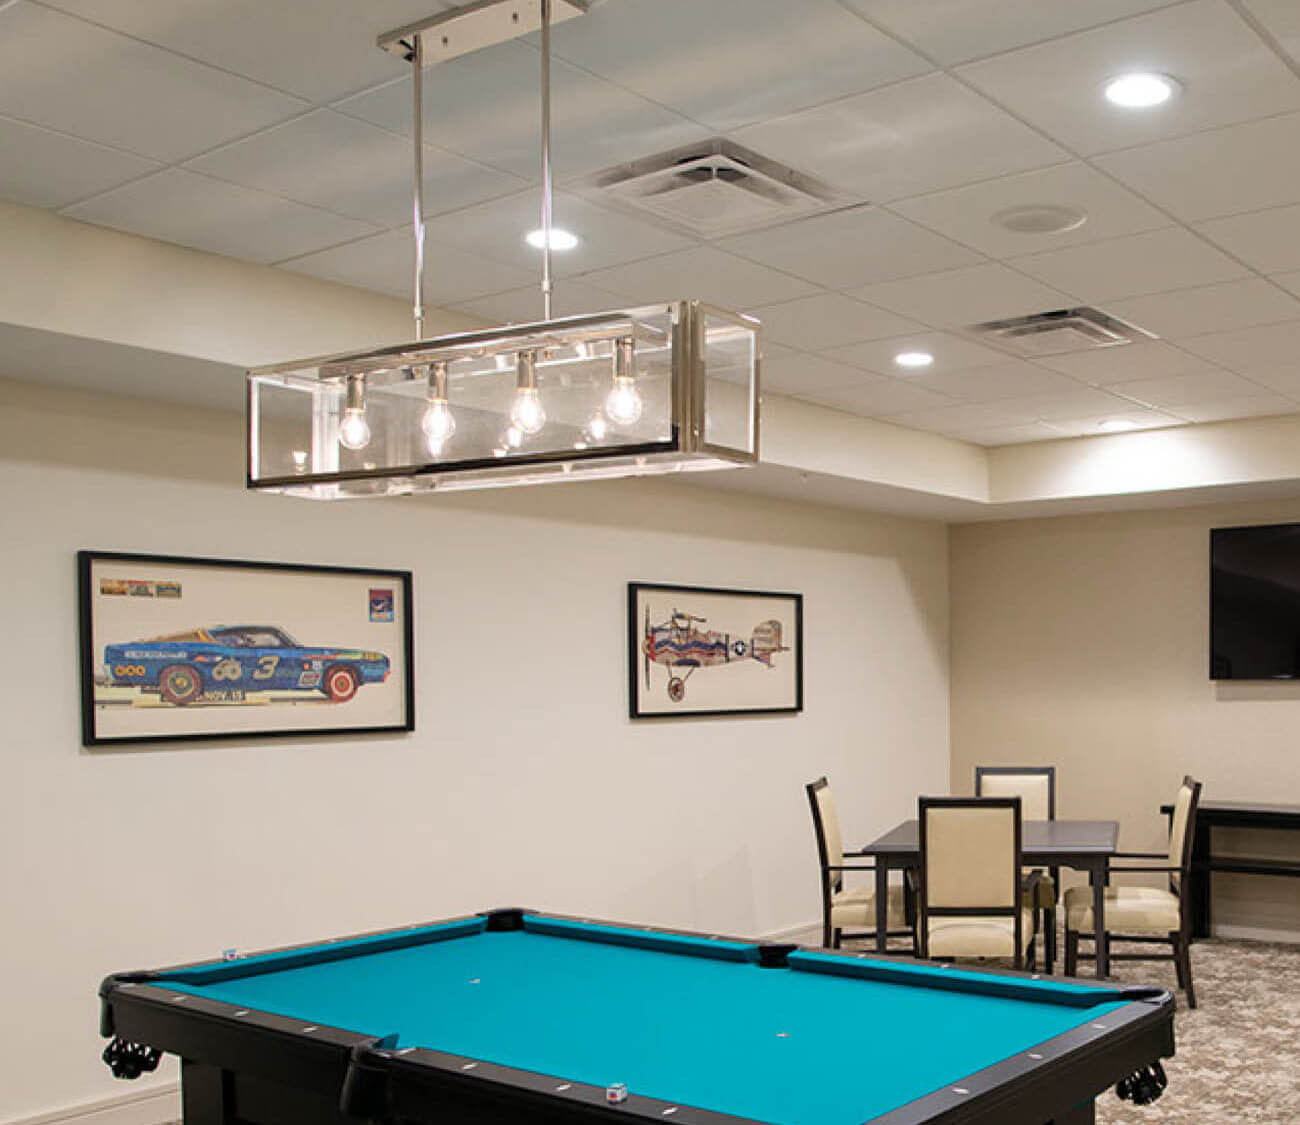 Game room at Highpoint at Cape Coral including pool table and card table.